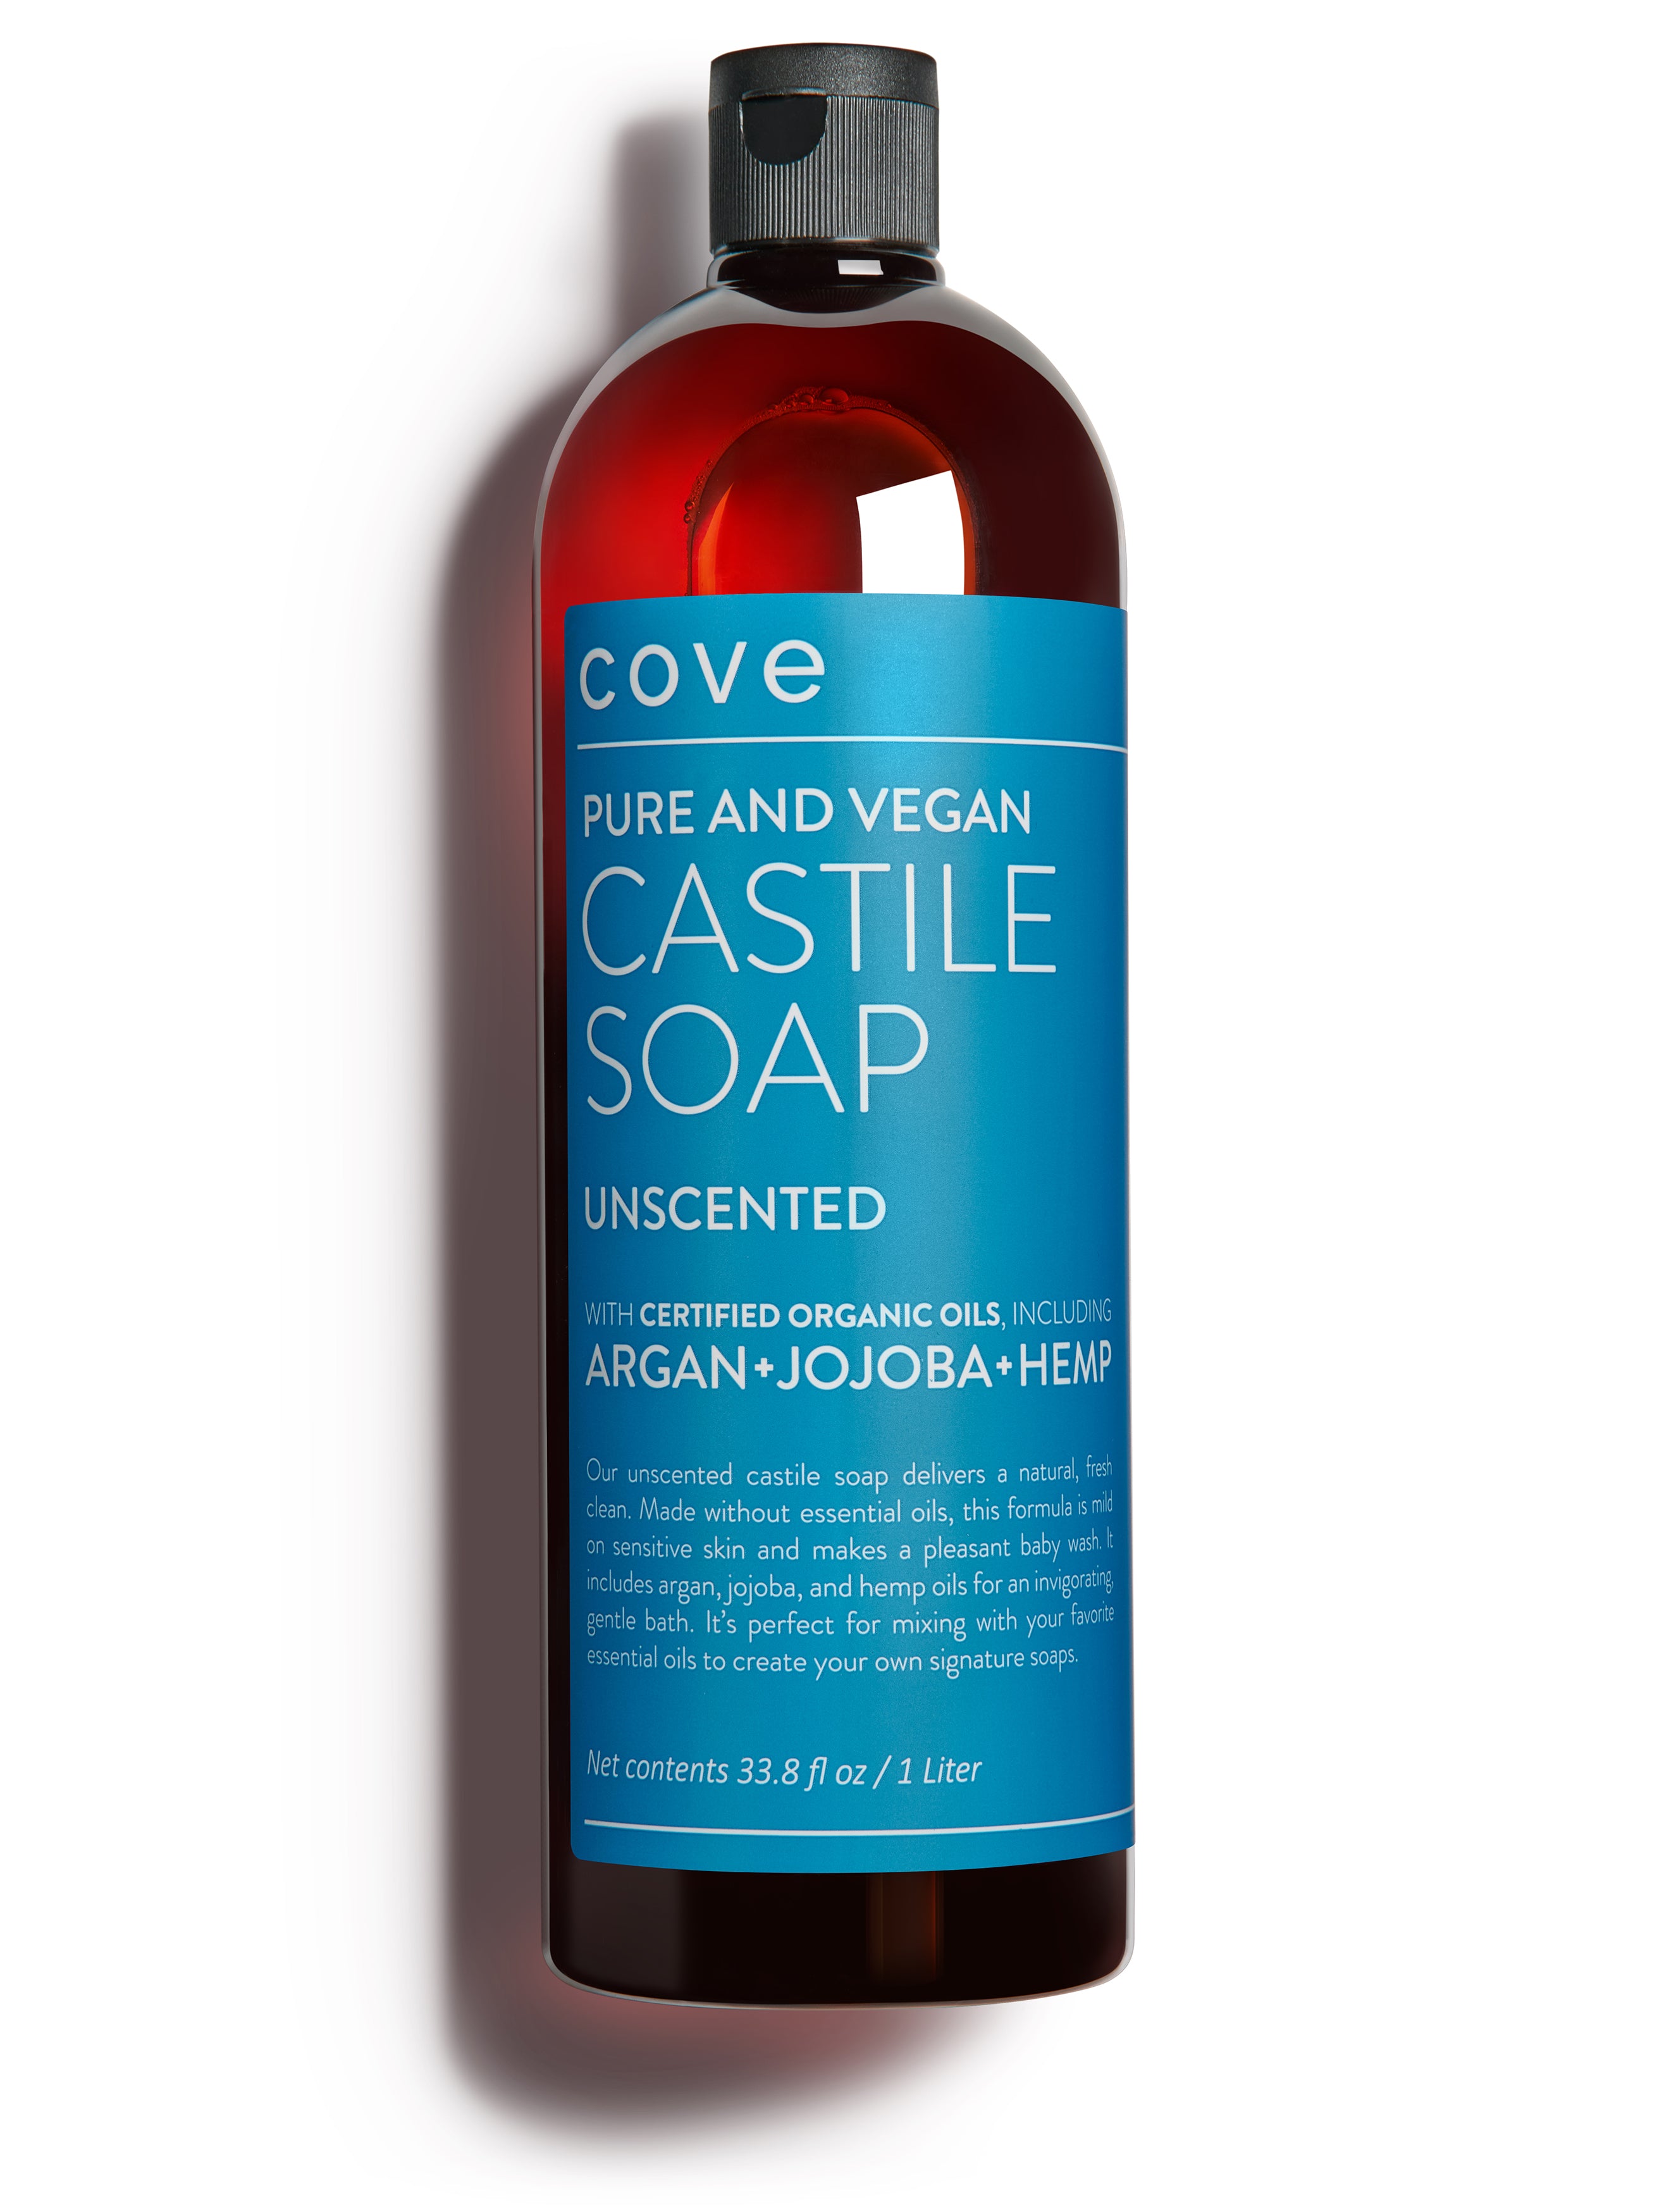 Cove Pure And Vegan Castile Soap – Unscented